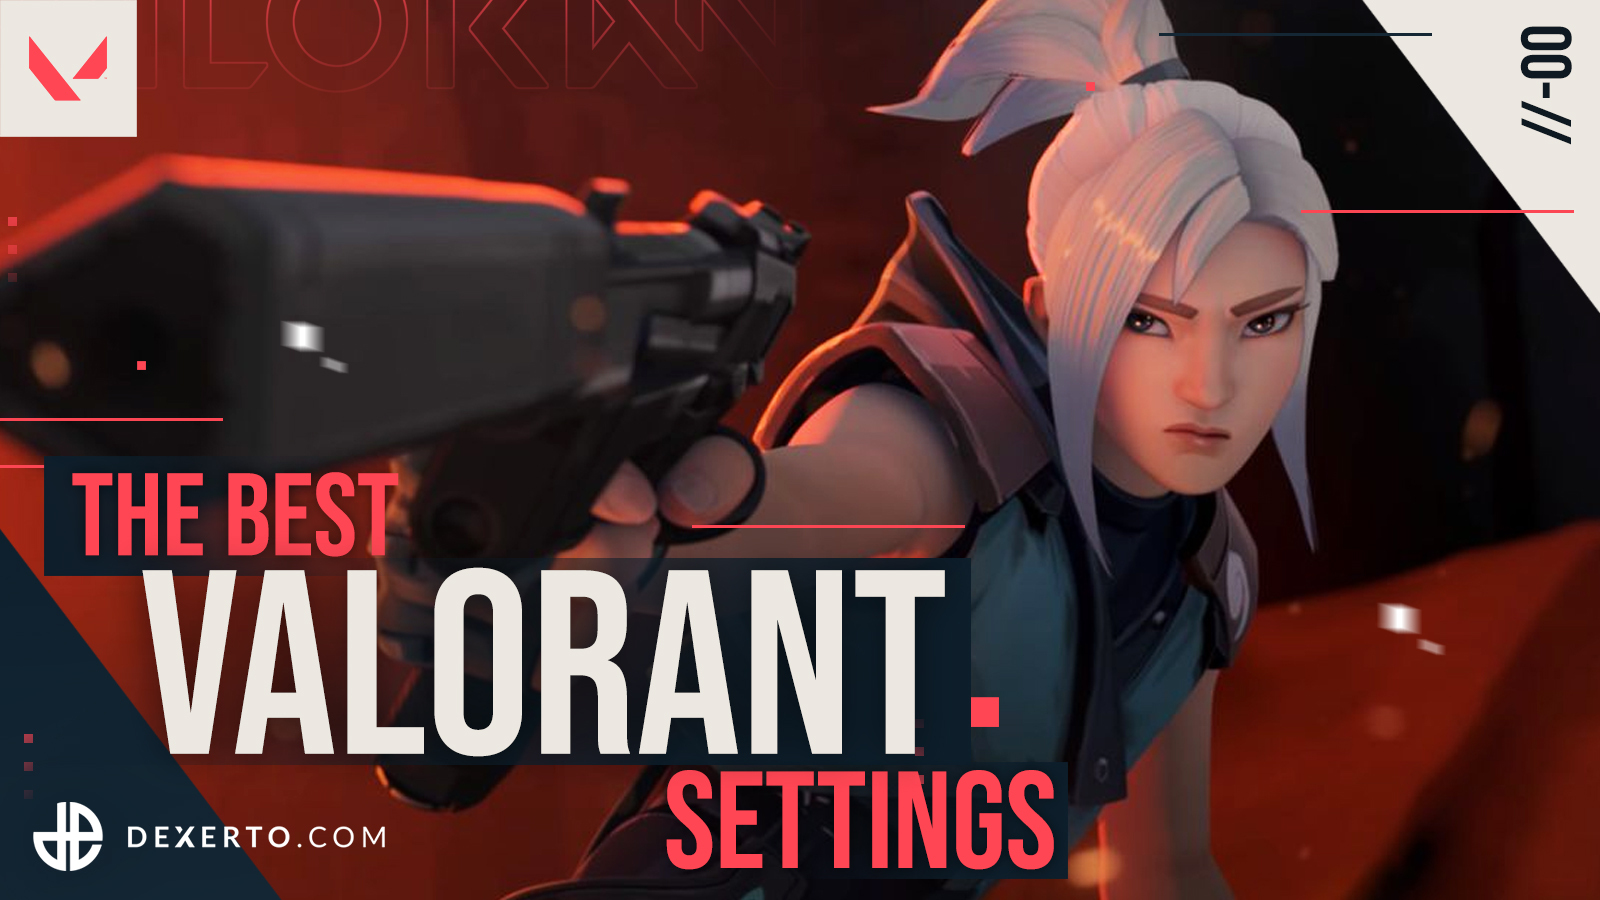 The best Valorant settings for performance, according to a Riot dev